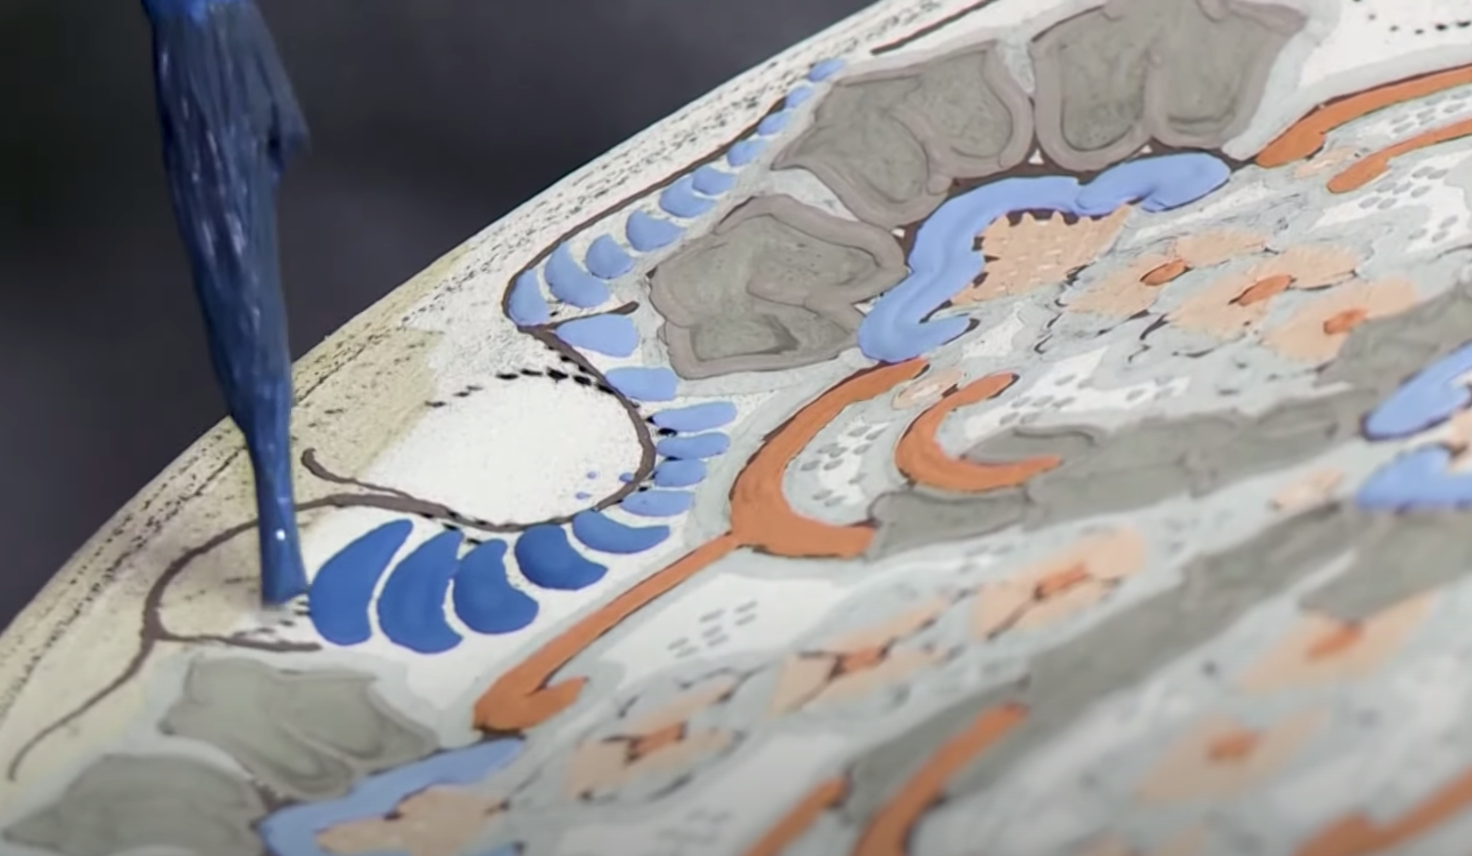 A piece of Talavera pottery being painted in blue